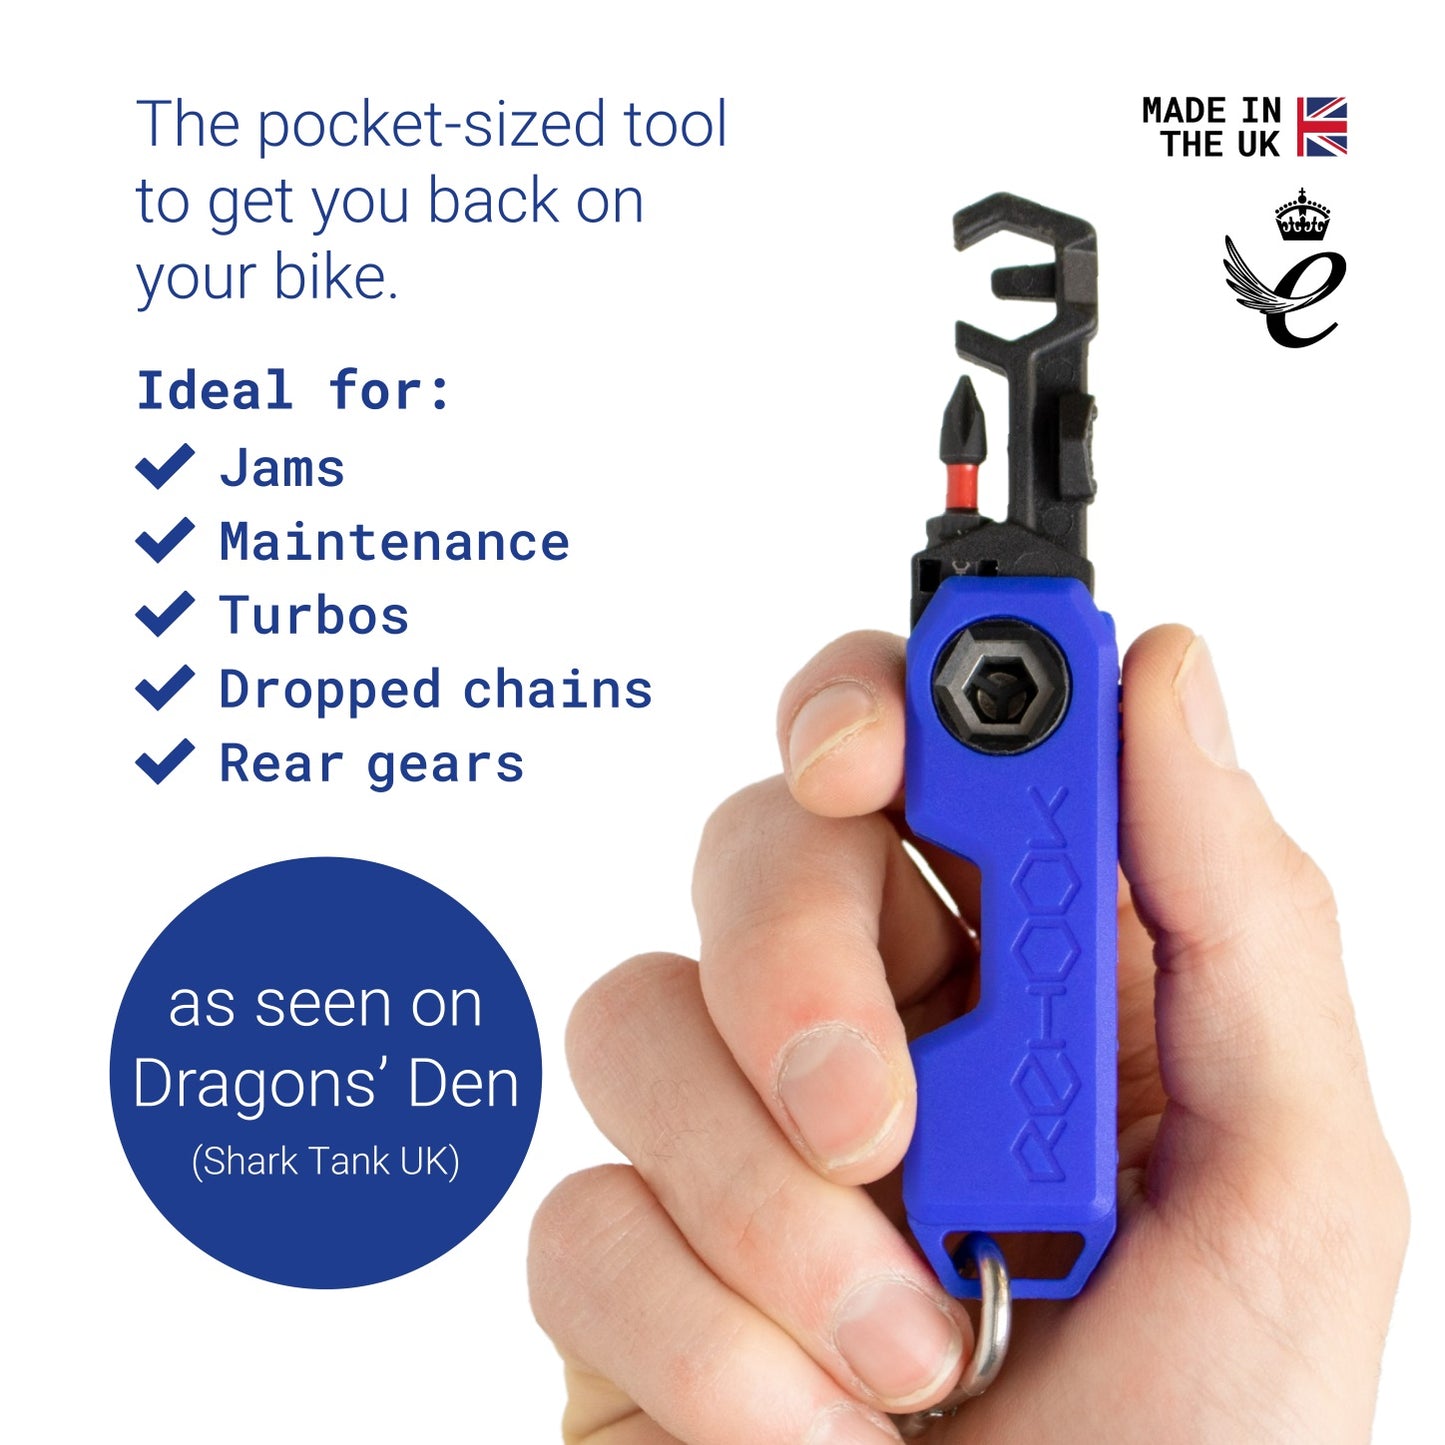 Rehook Tyre Glider - A Strong Portable Bicycle Tyre replacement and Bike  Tire Remover Tool - No more Tyre Levers or Tyre Changing Spoons to Repair  Your Bike Tube : Sports & Outdoors 